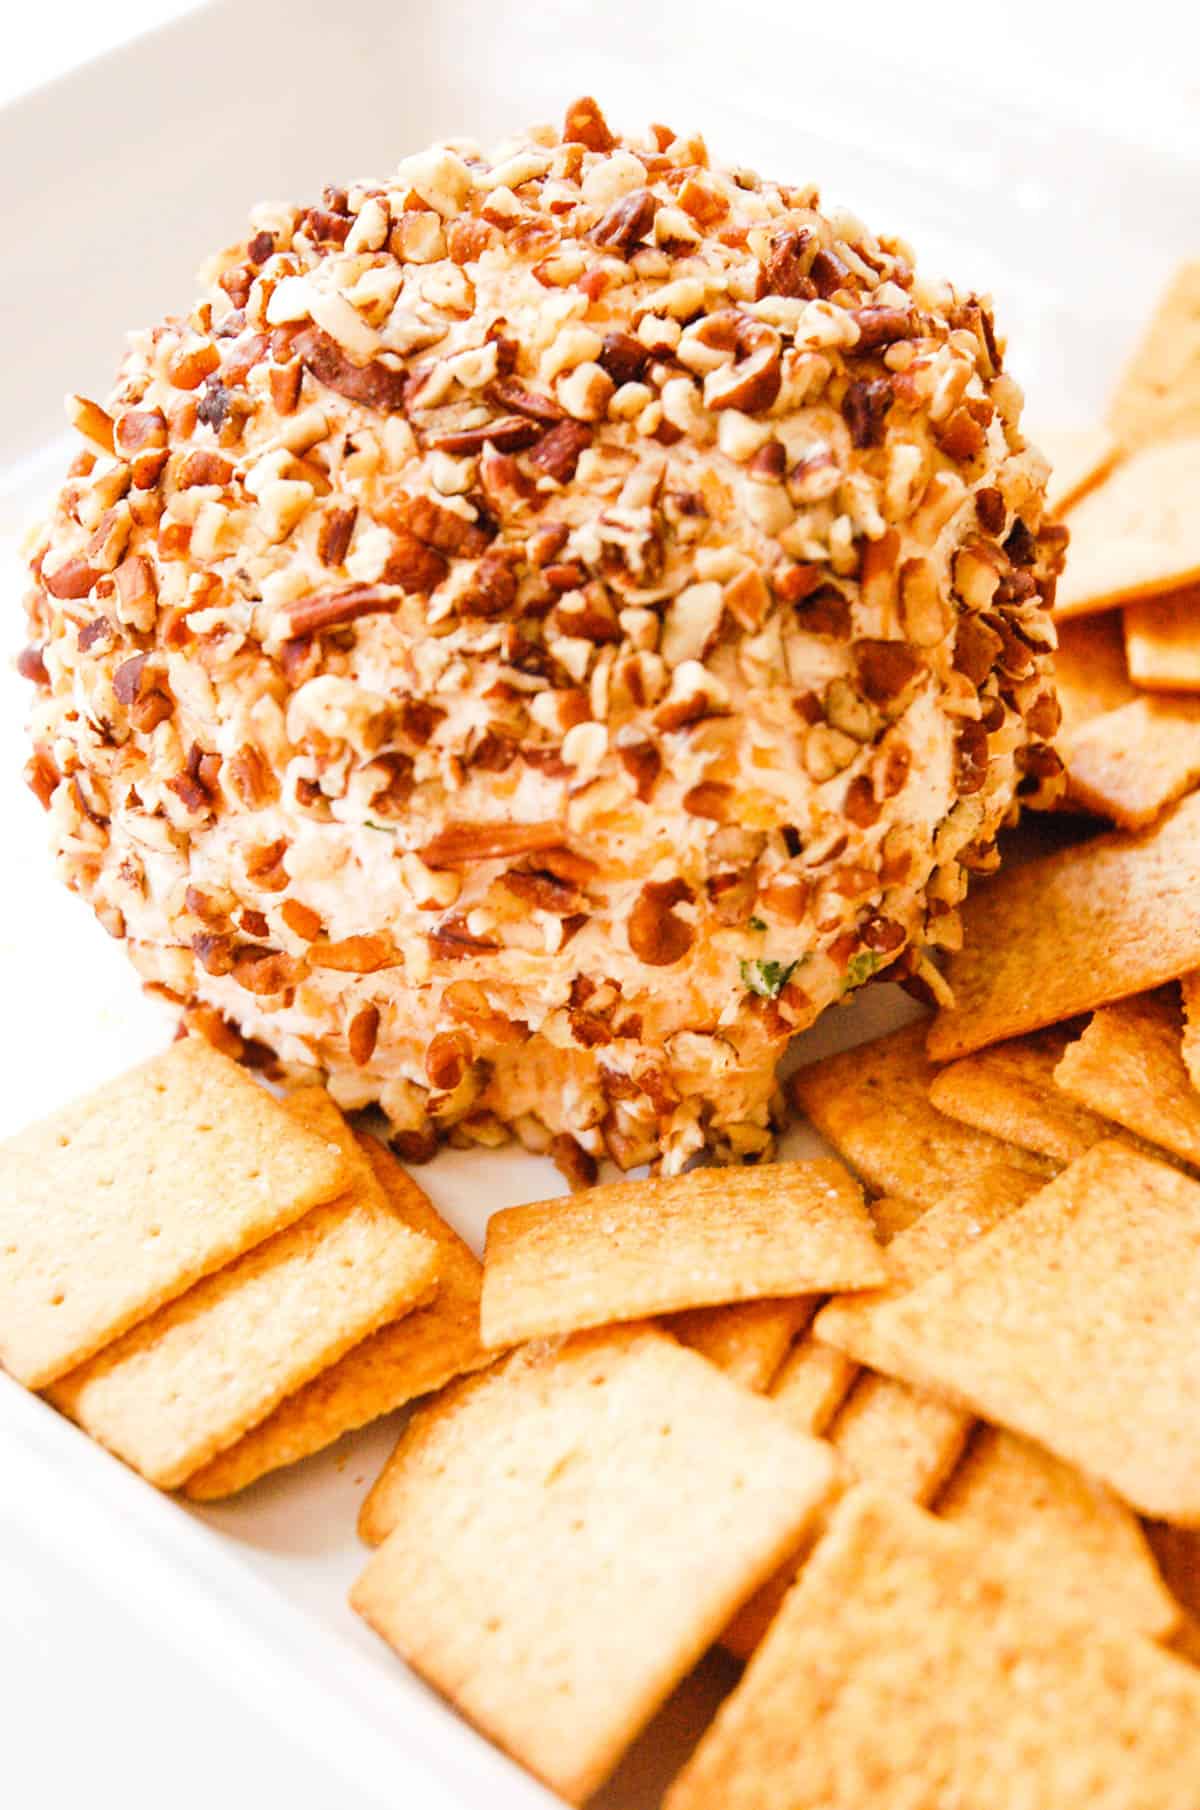 Cheese ball on a platter with crackers.